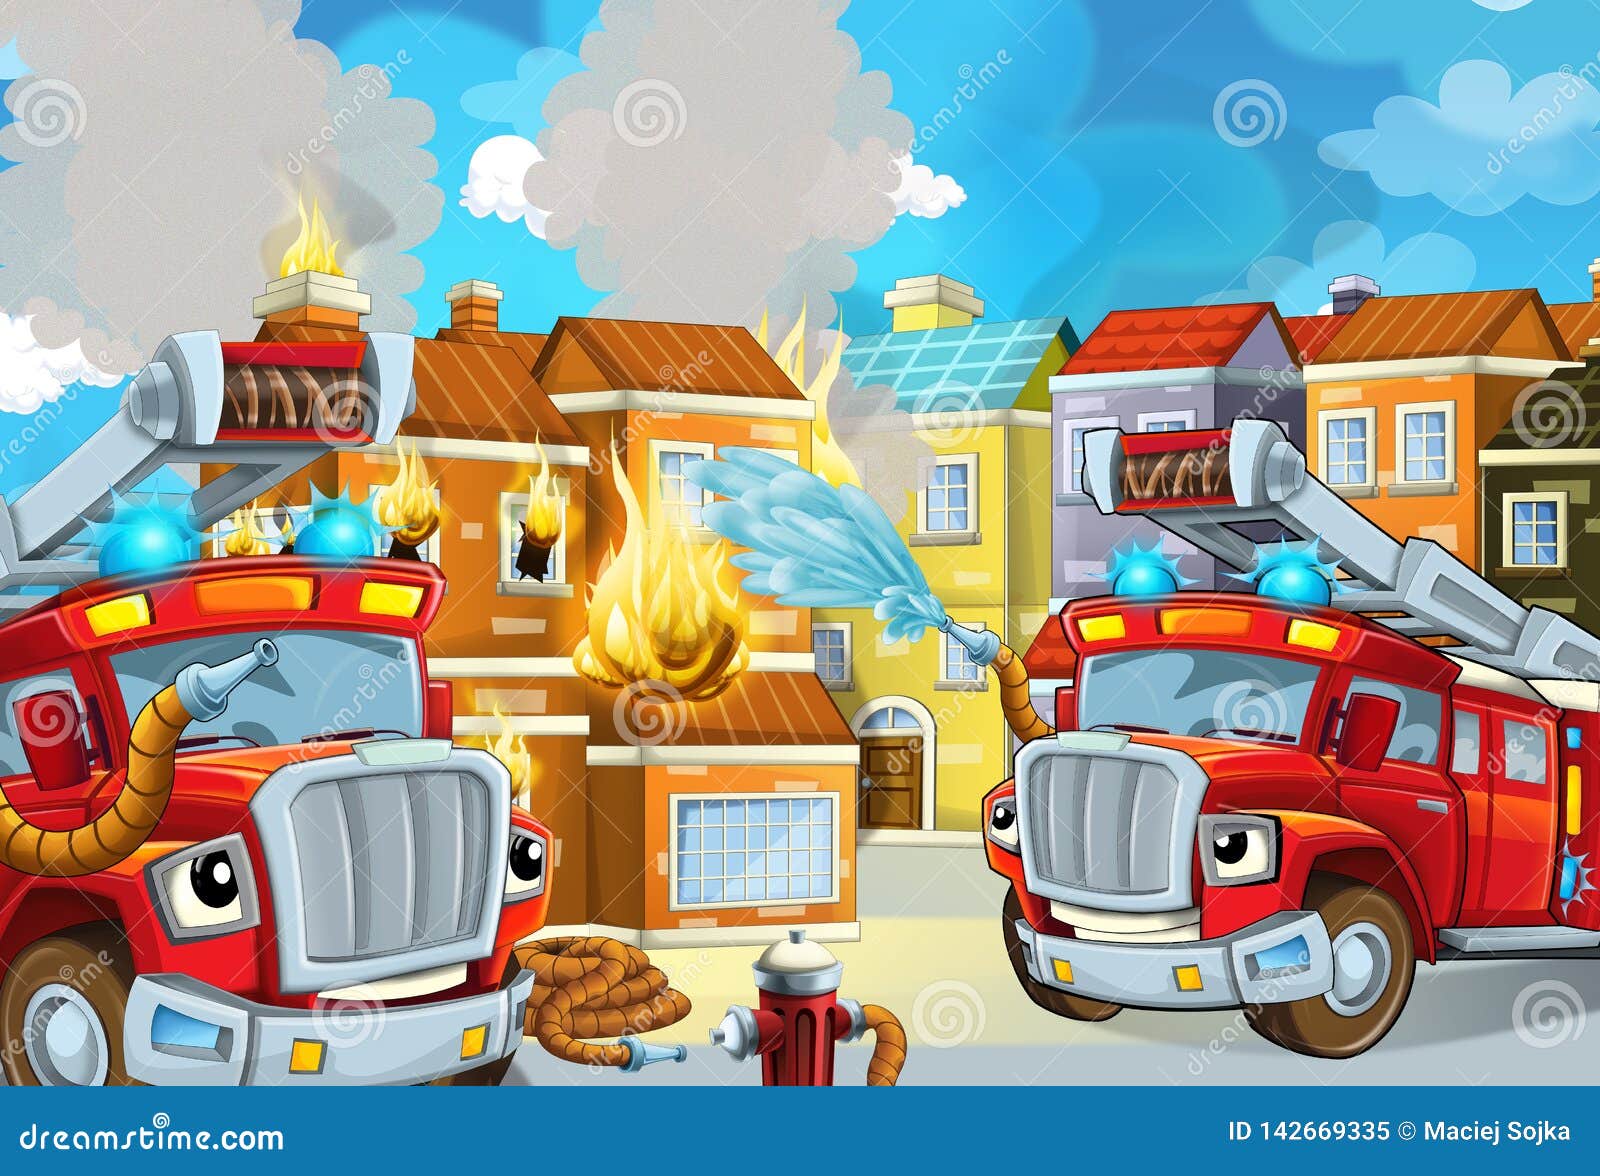 Cartoon Stage with Fireman and Fire Truck Near Burning Building Colorful  Scene Stock Illustration - Illustration of anime, beautiful: 142669335